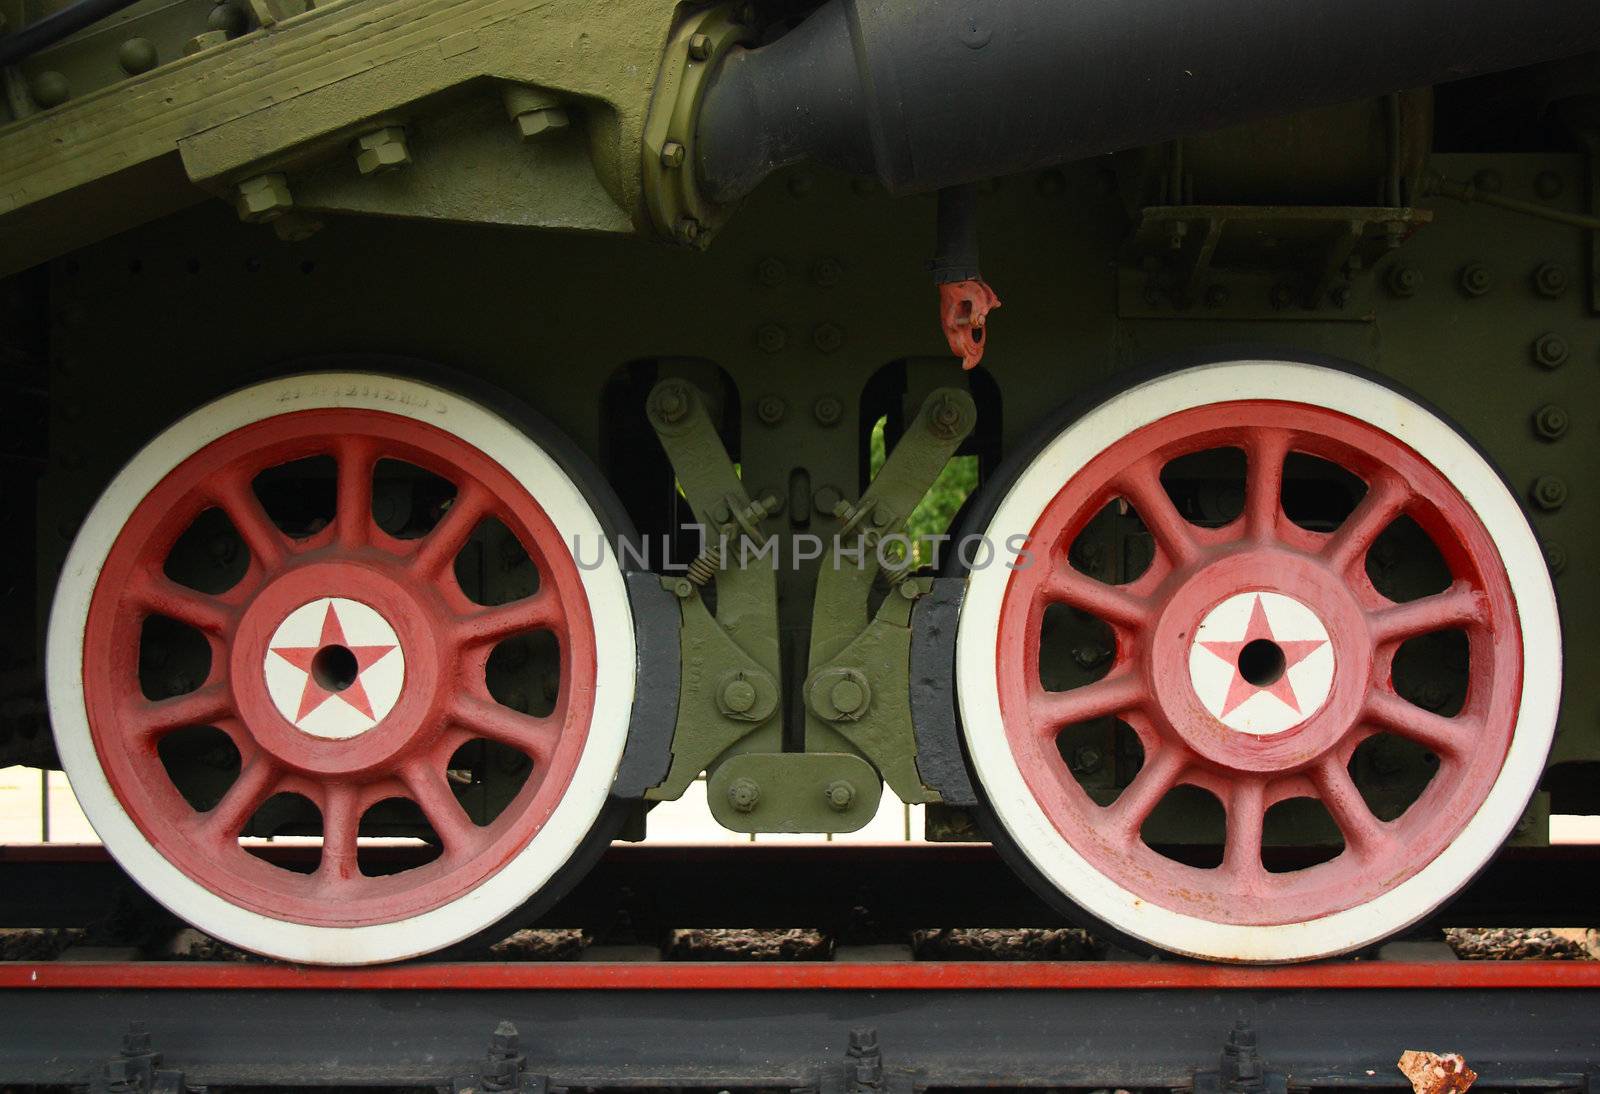 Wheels of the old locomotive on the rails